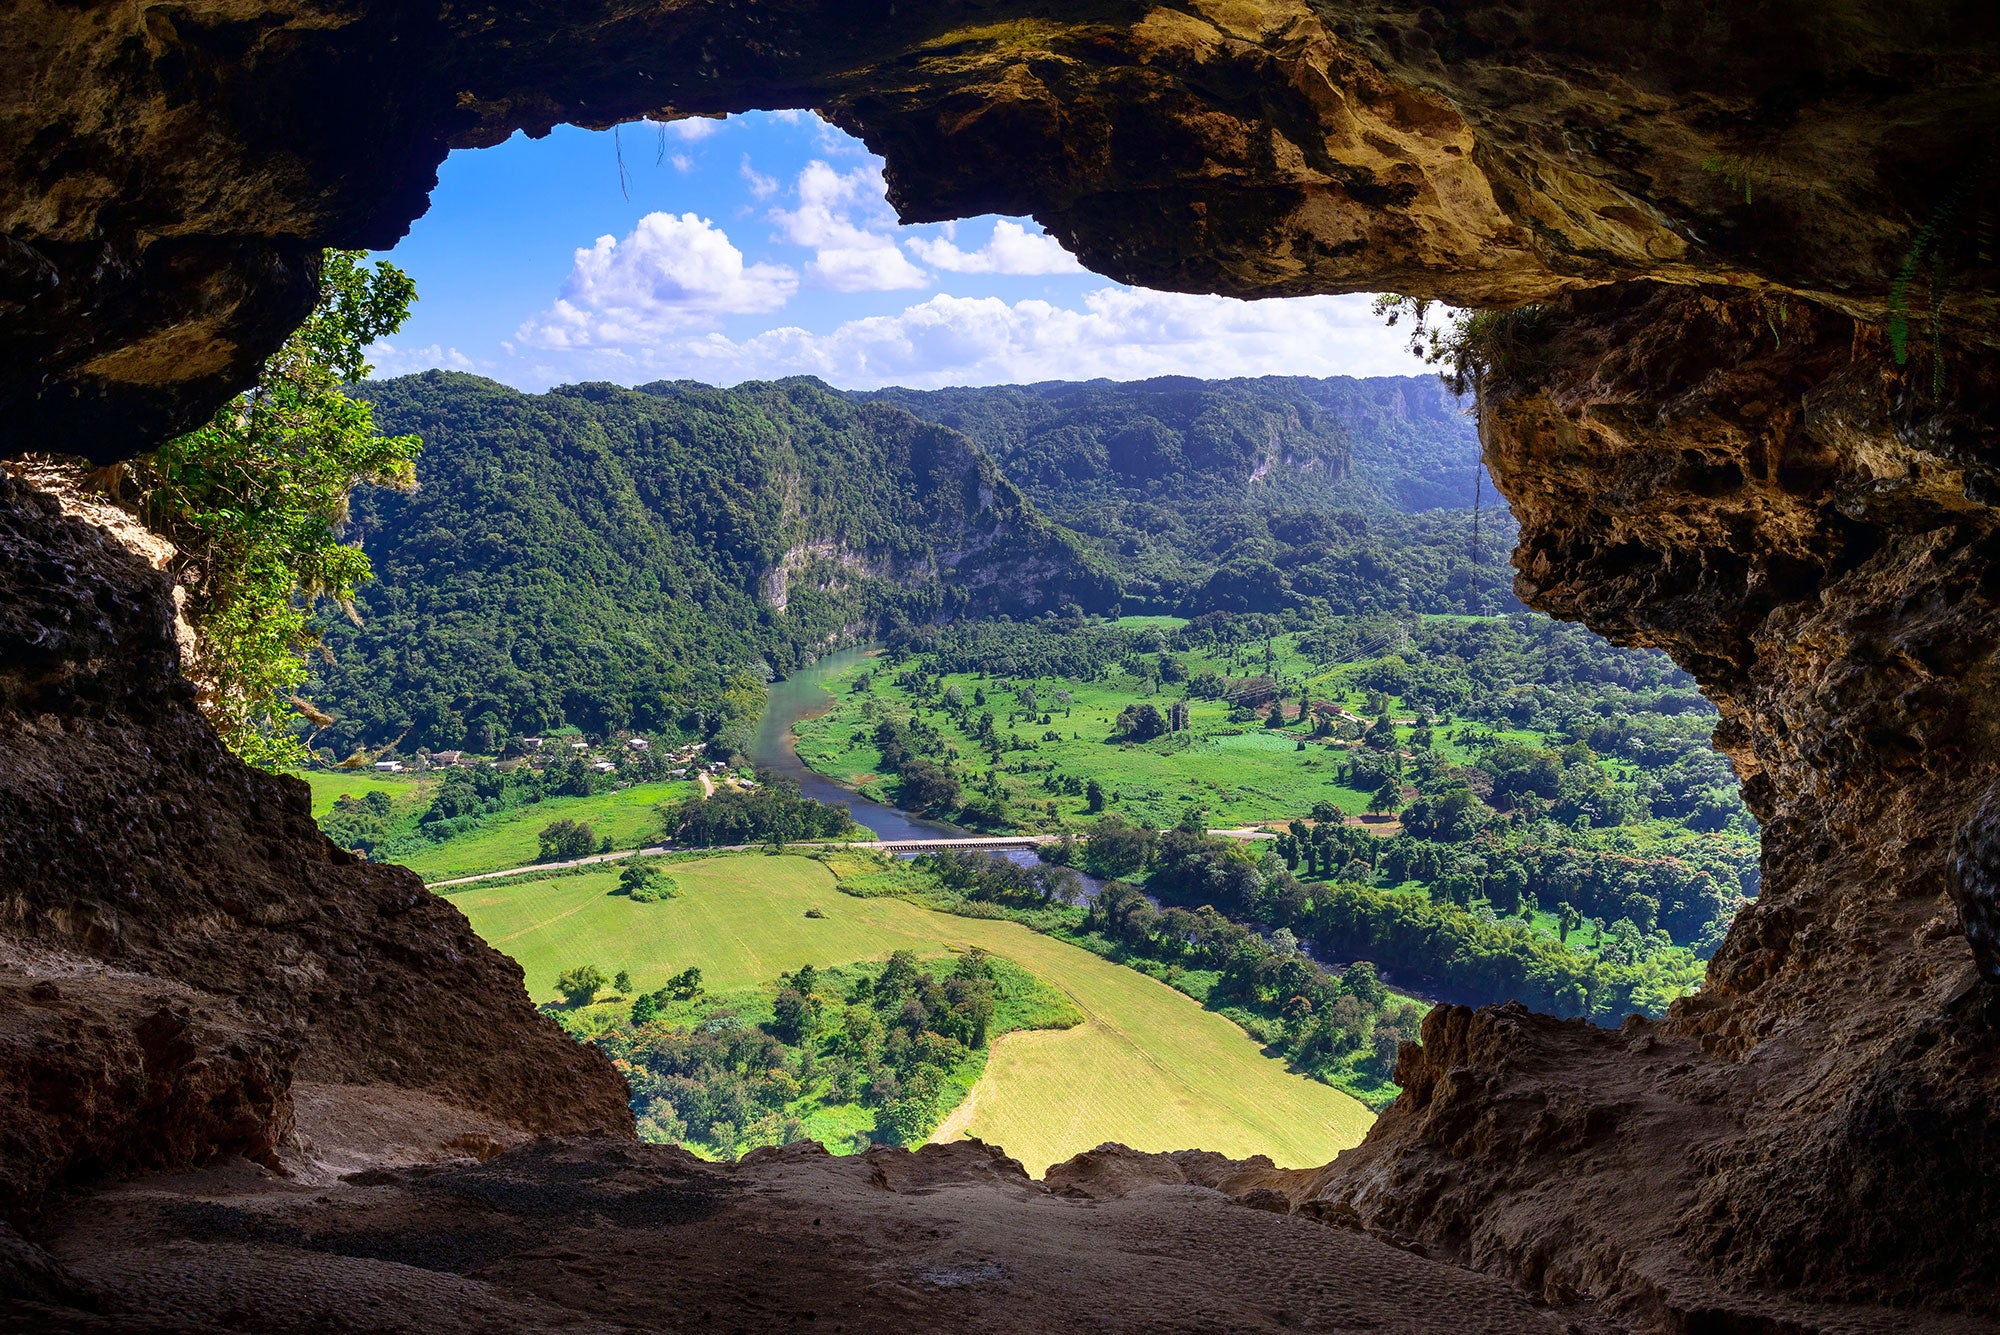 A view of the verdant landscape of Puerto Rico through an opening in the rocky mountainside.